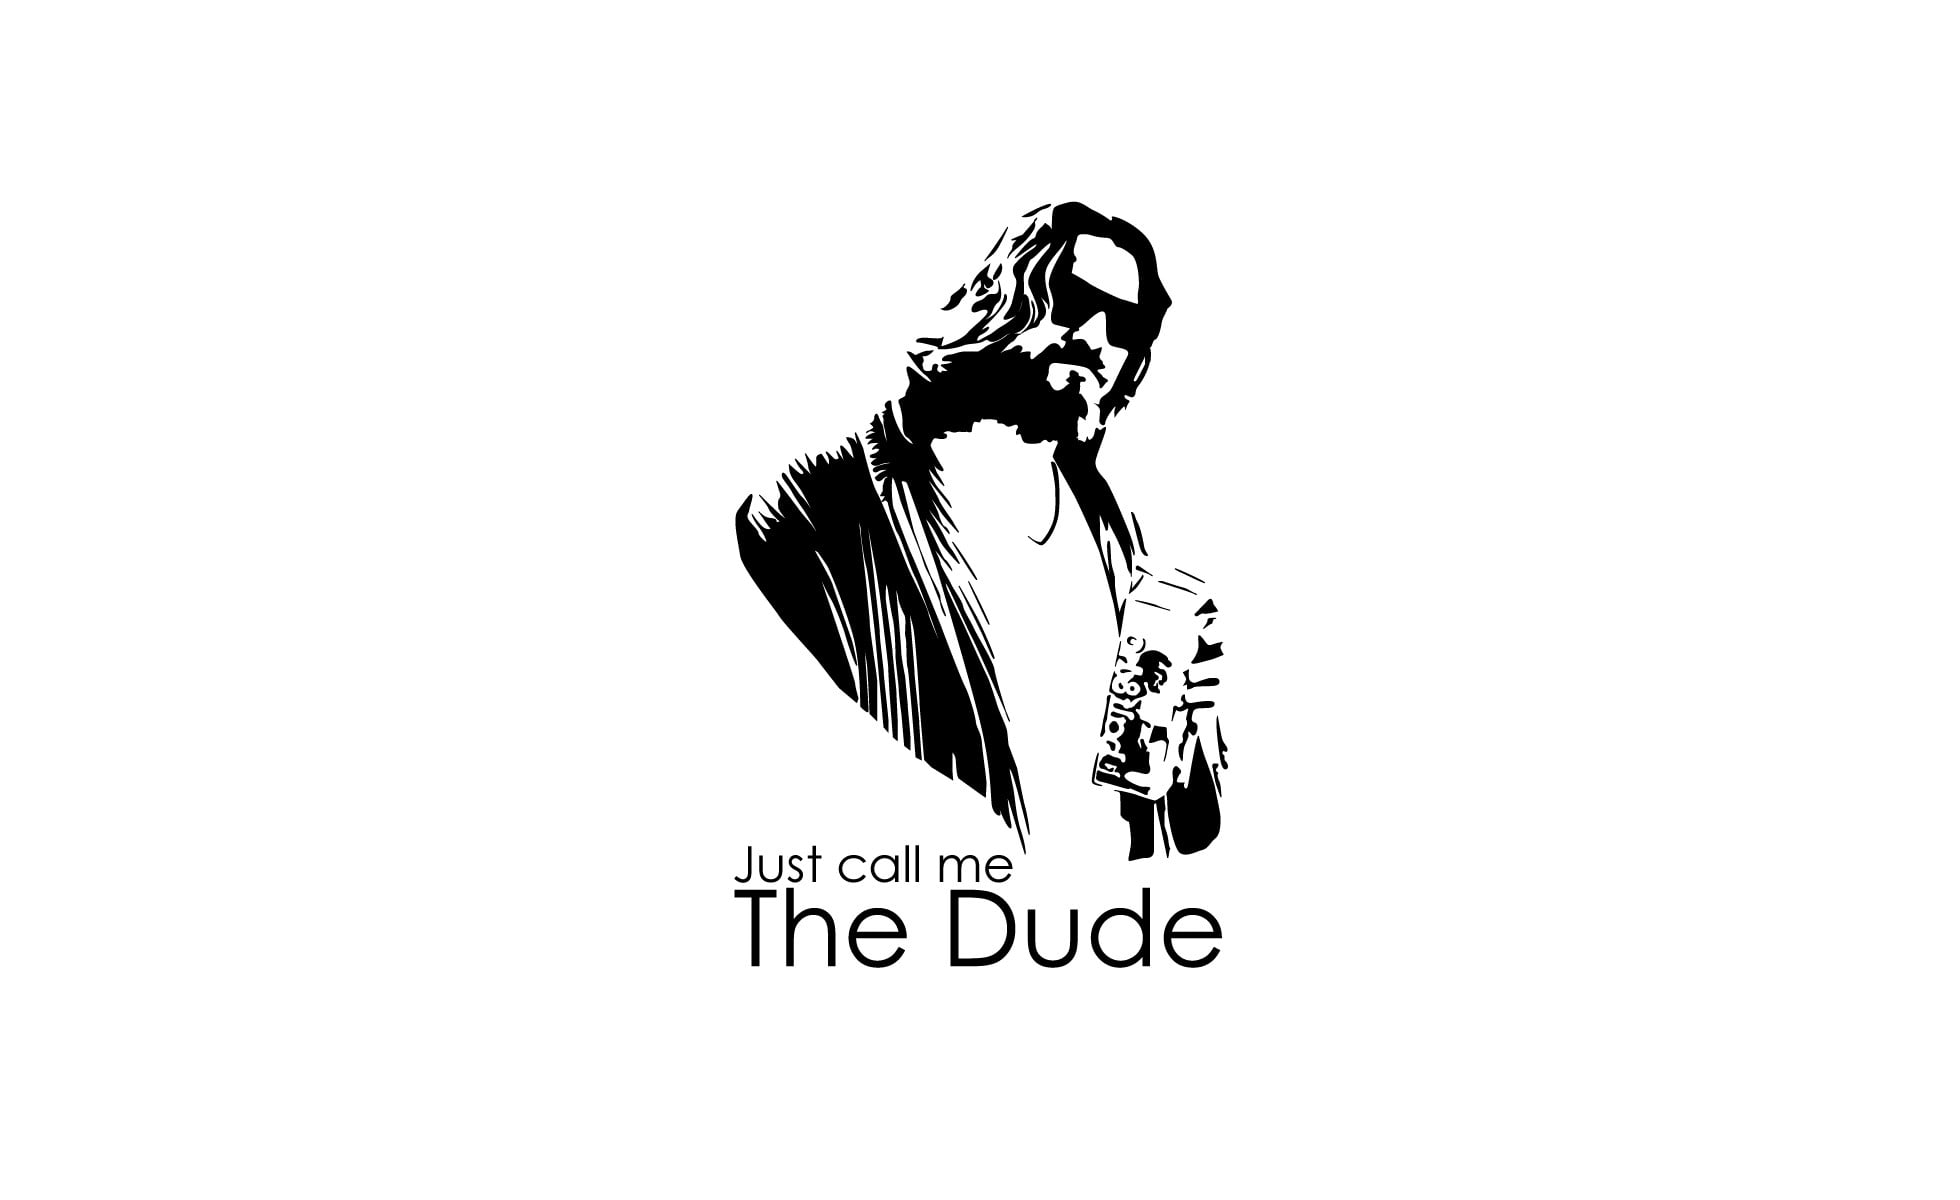 2160x1440 resolution | just call me The Dude illustration, The Dude ...